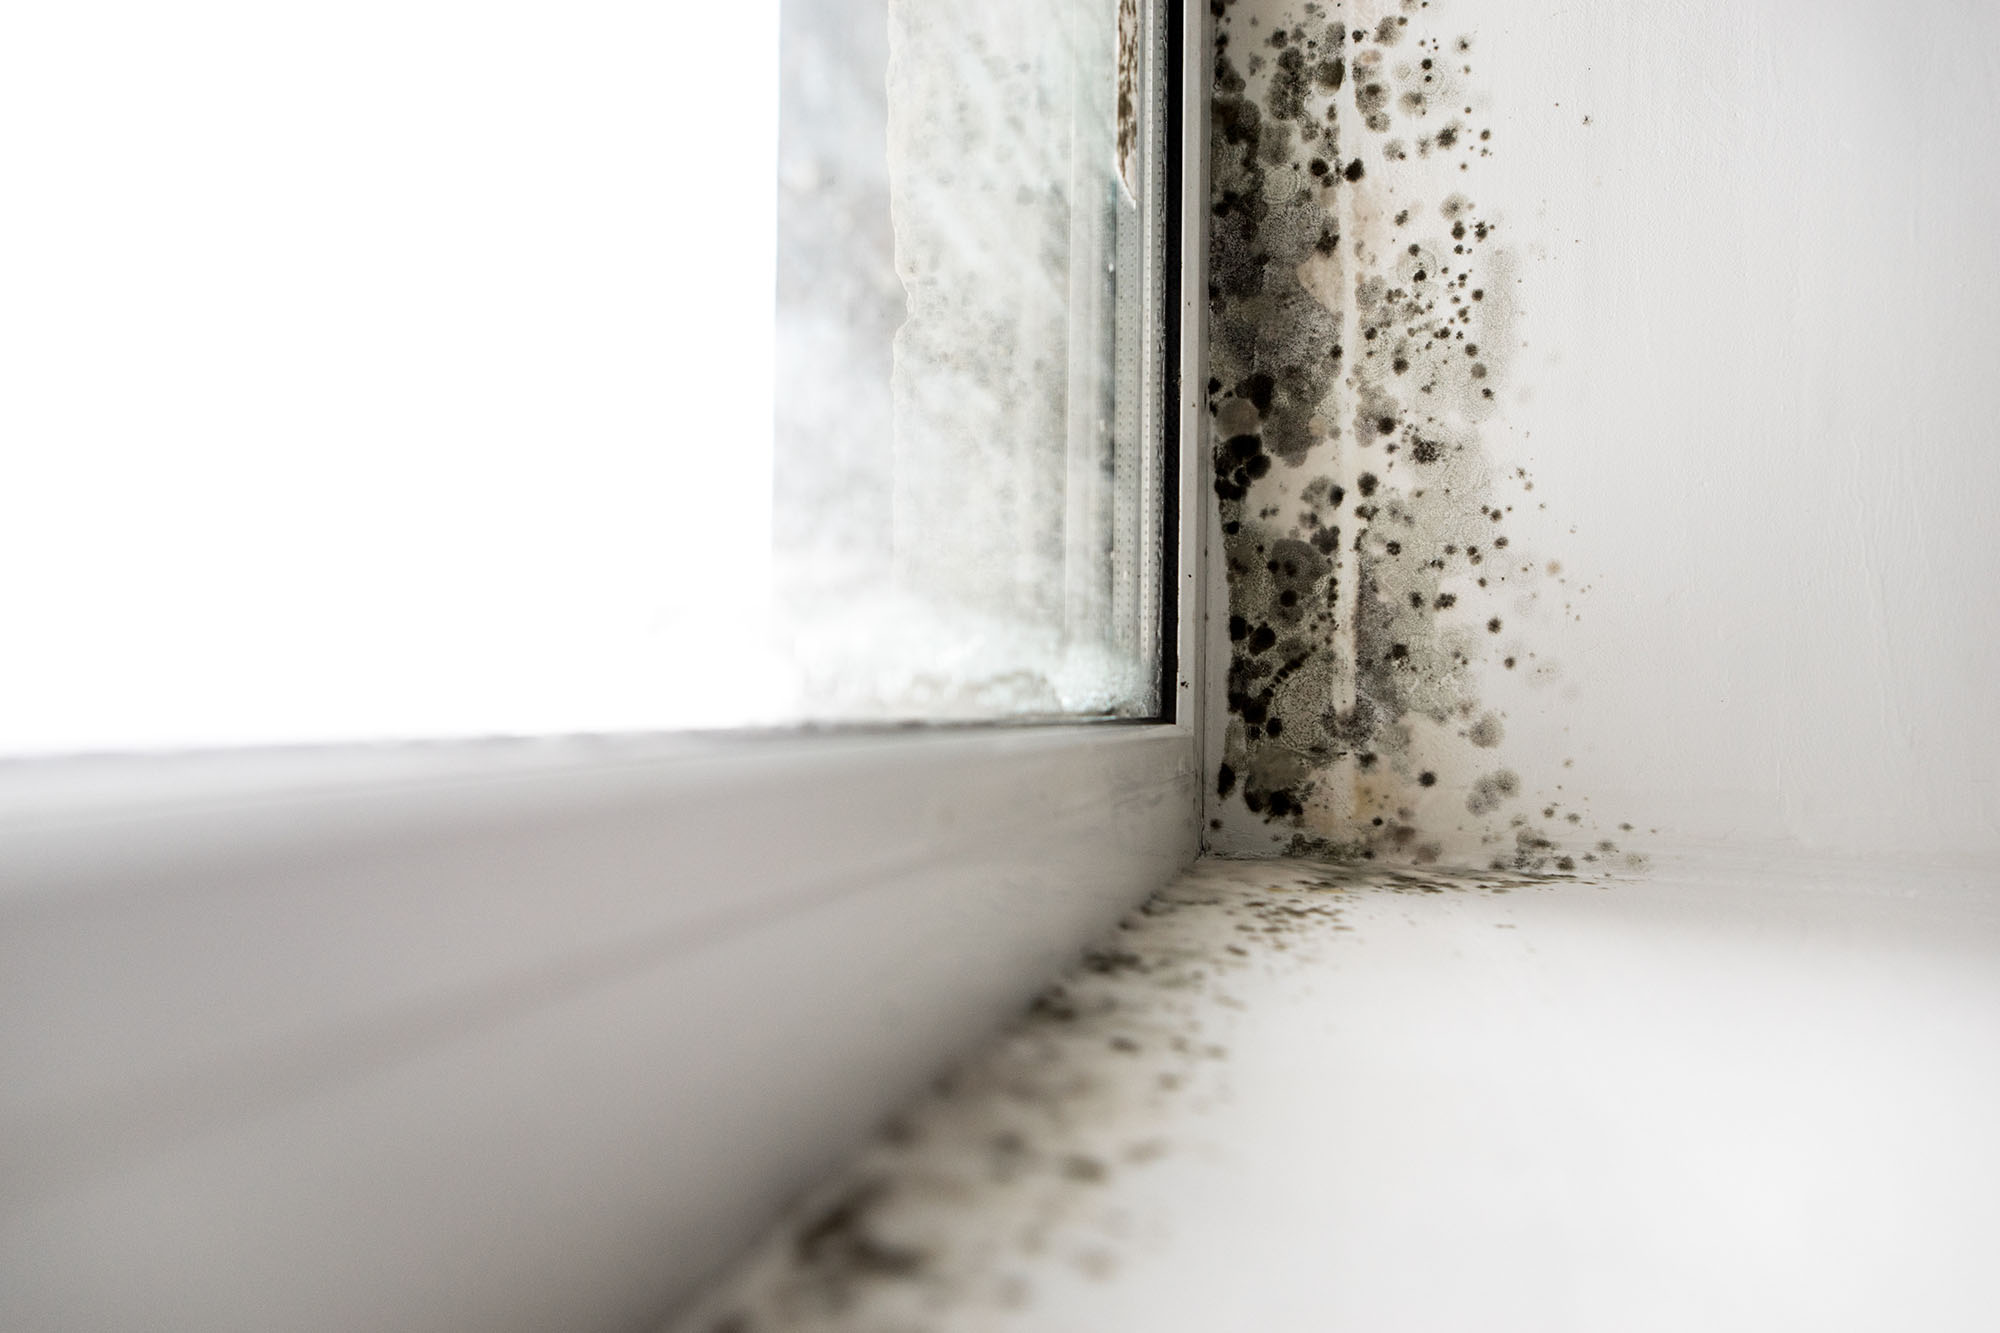 Mold water damage in a new home